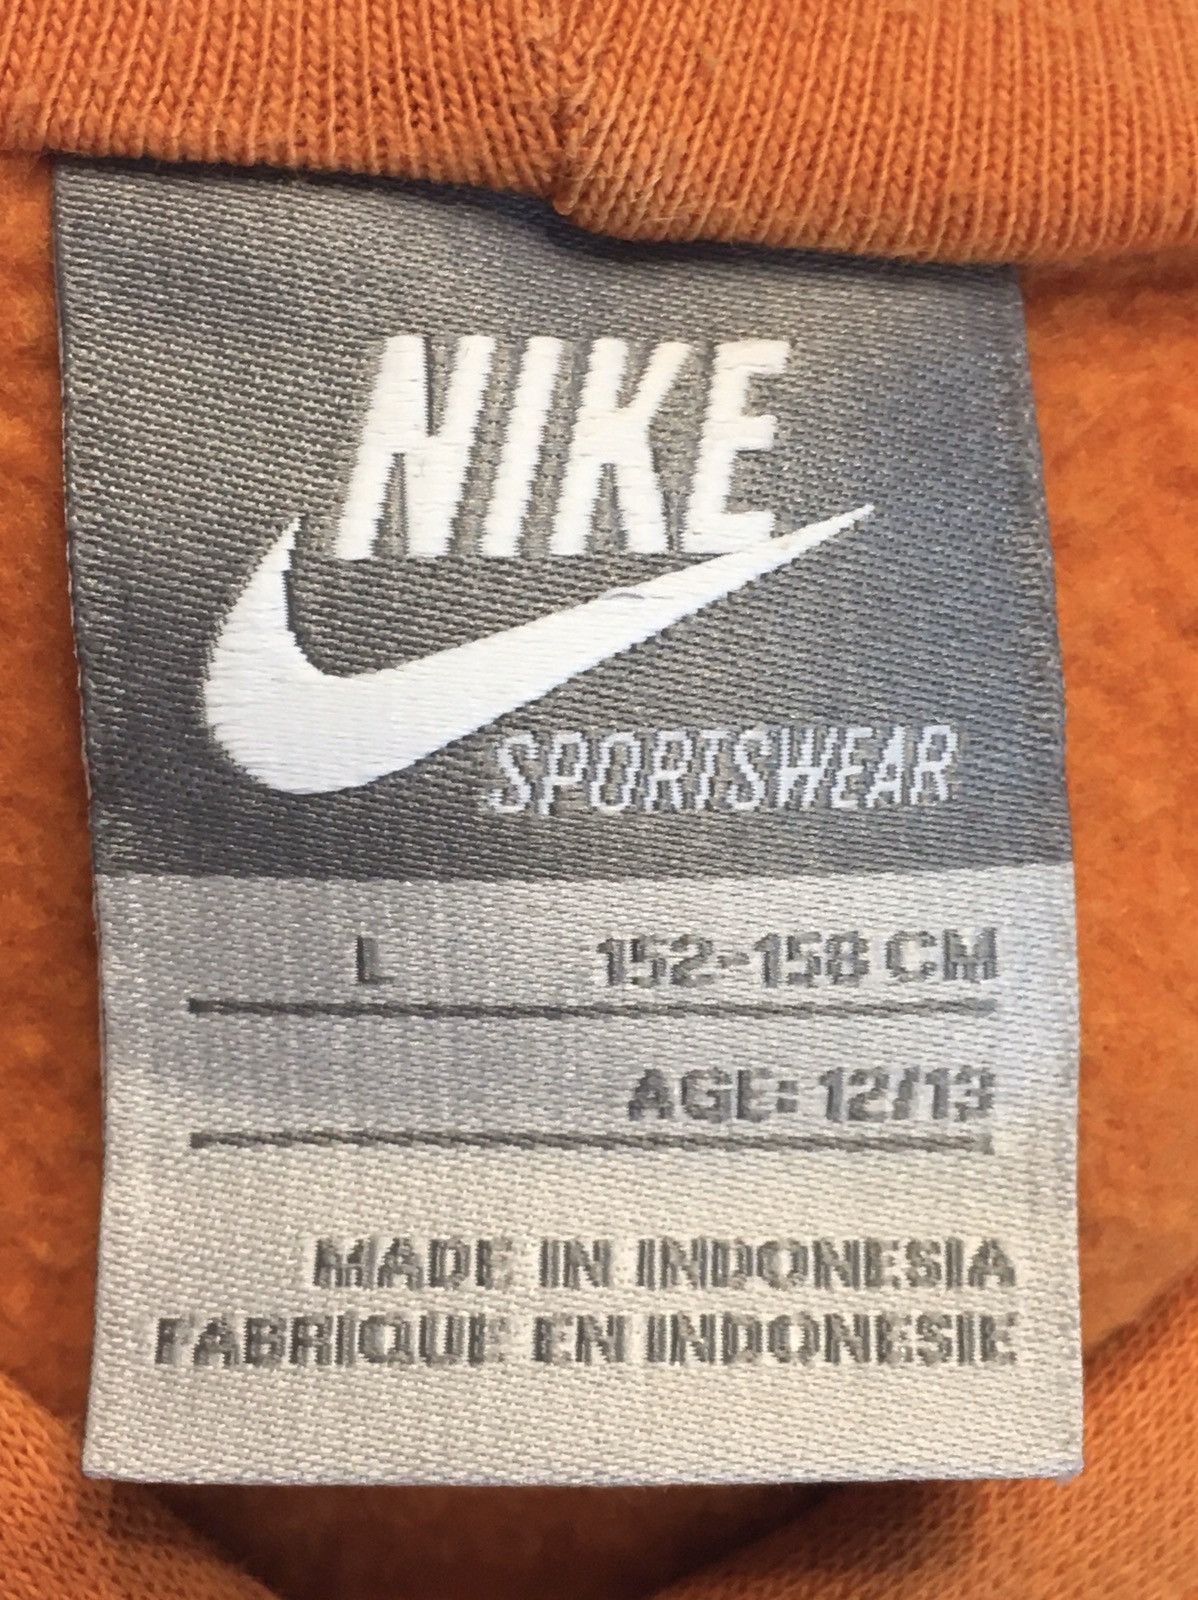 Nike Nike Vintage centr swoosh Hoodie Size US S / EU 44-46 / 1 - 5 Preview